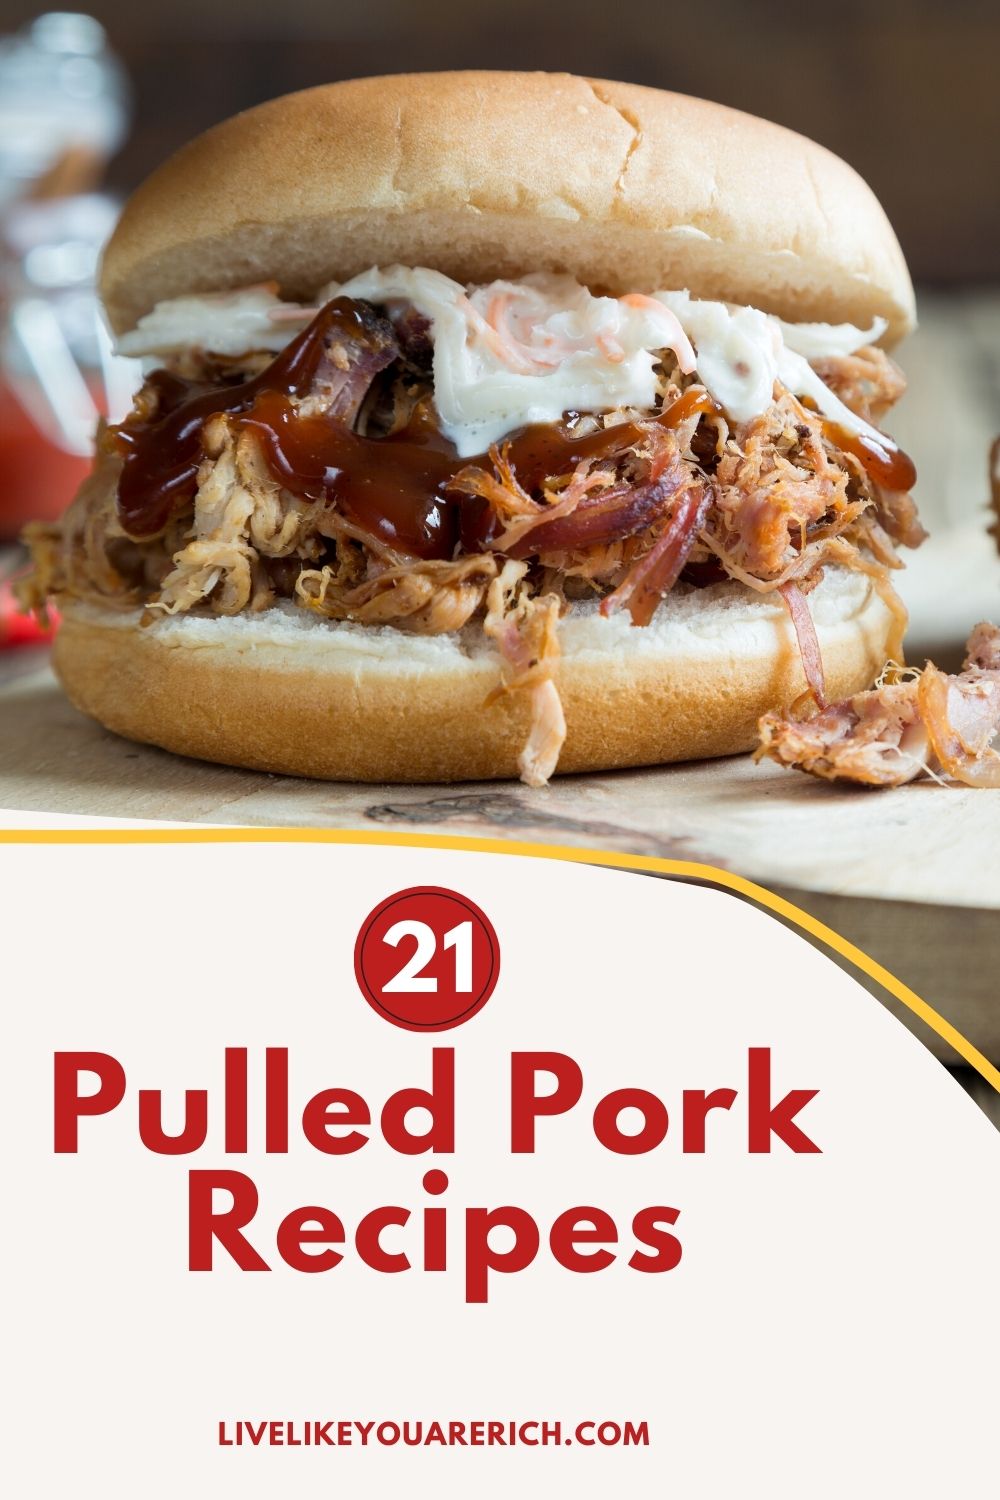 My family often has leftovers from our fall-part-tender smoked pulled pork recipe. I’ve rounded up 21+ delicious pulled pork recipes and decided to share them with you as well.